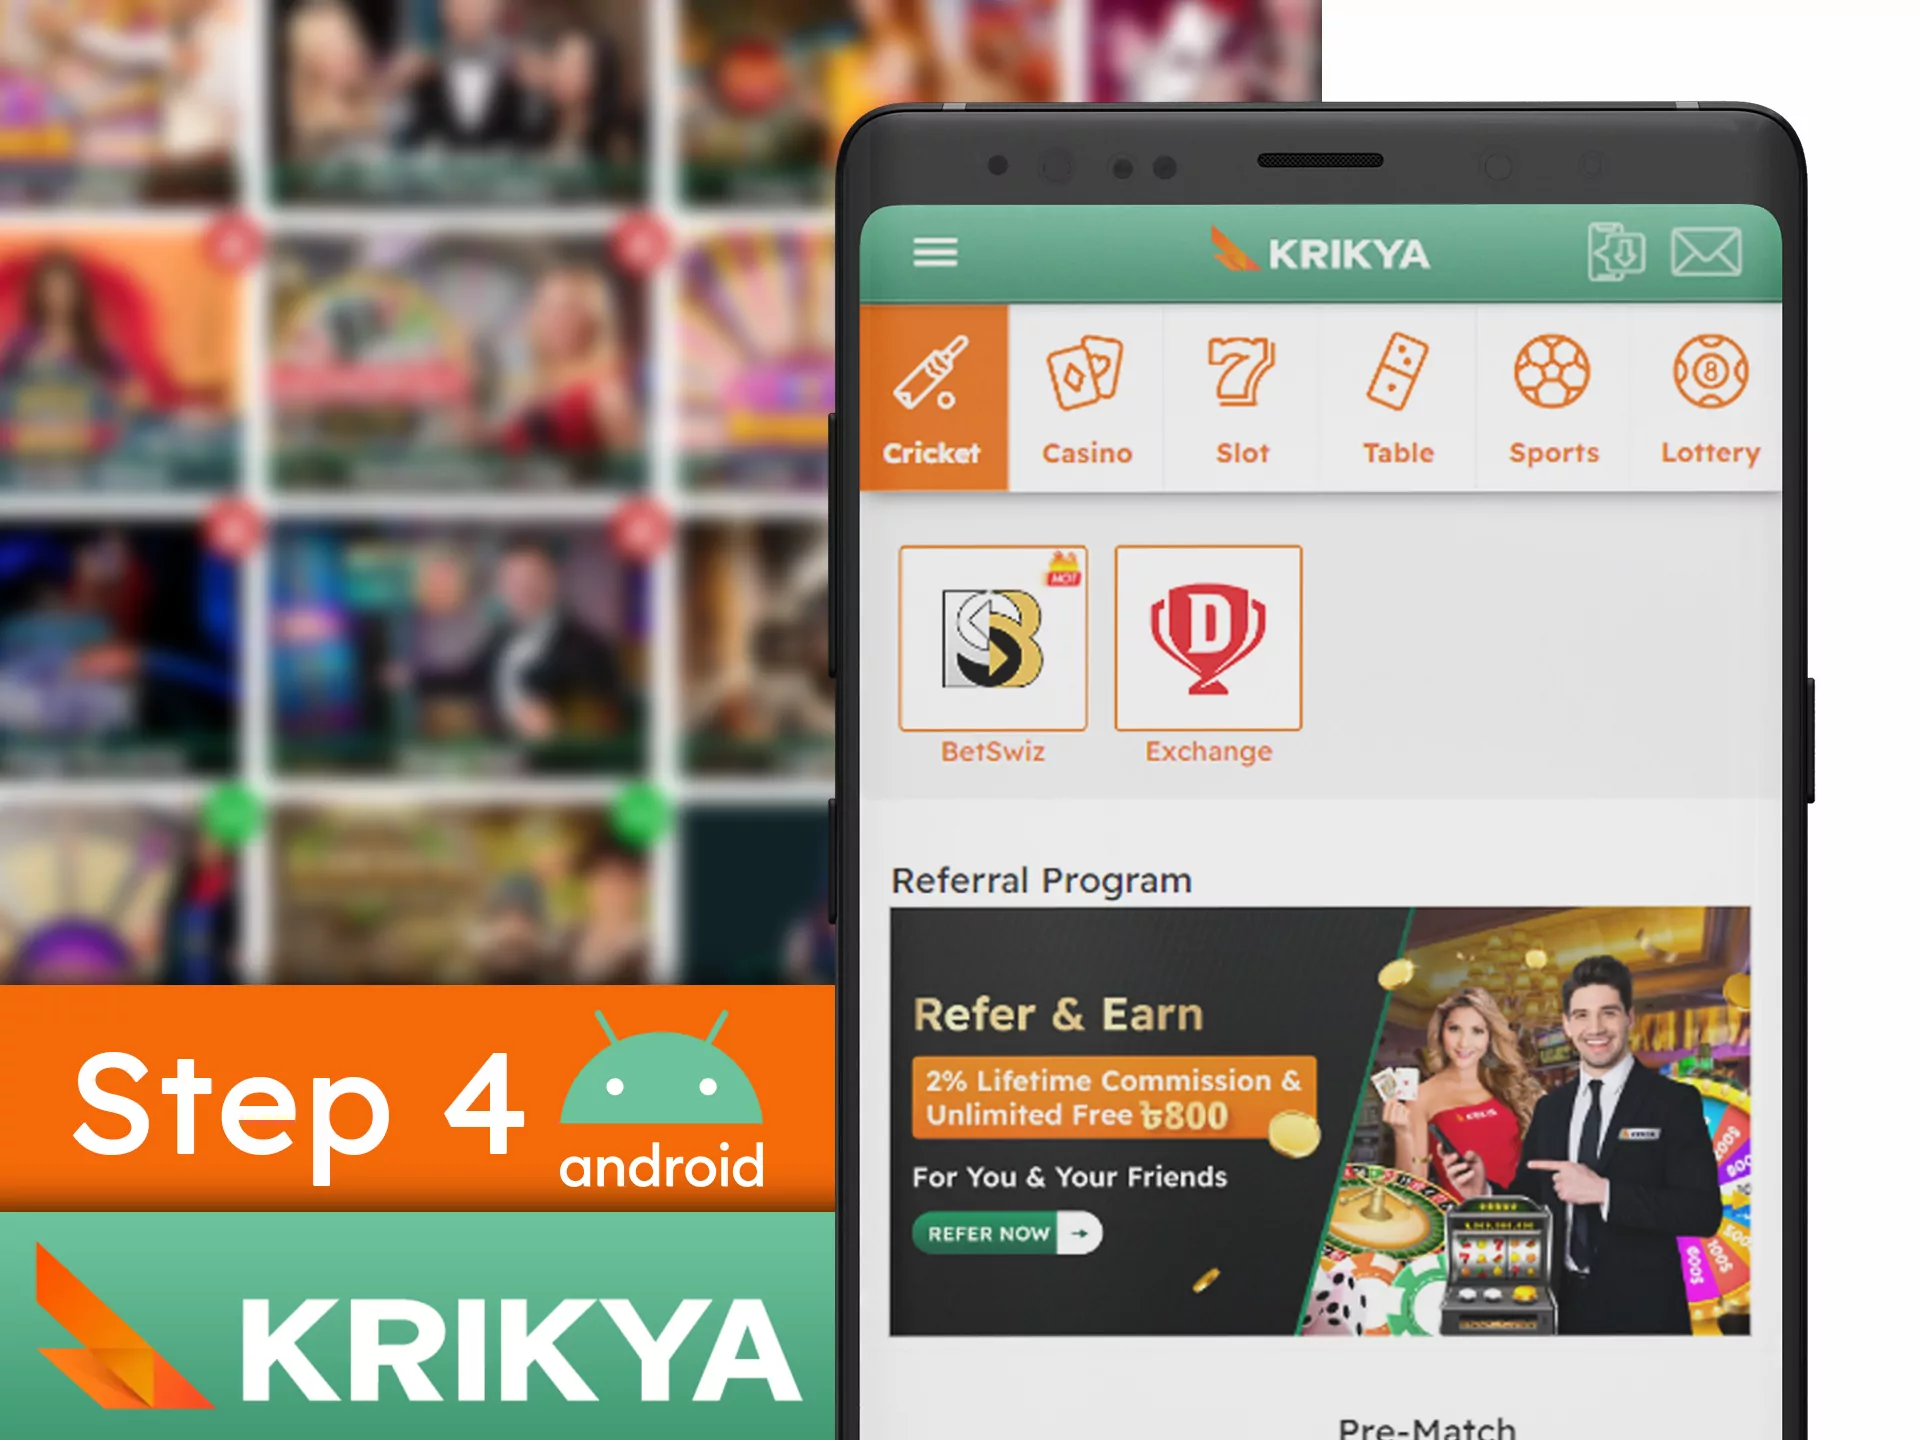 After confirming the installation of the app, you can begin your journey with Krikya.